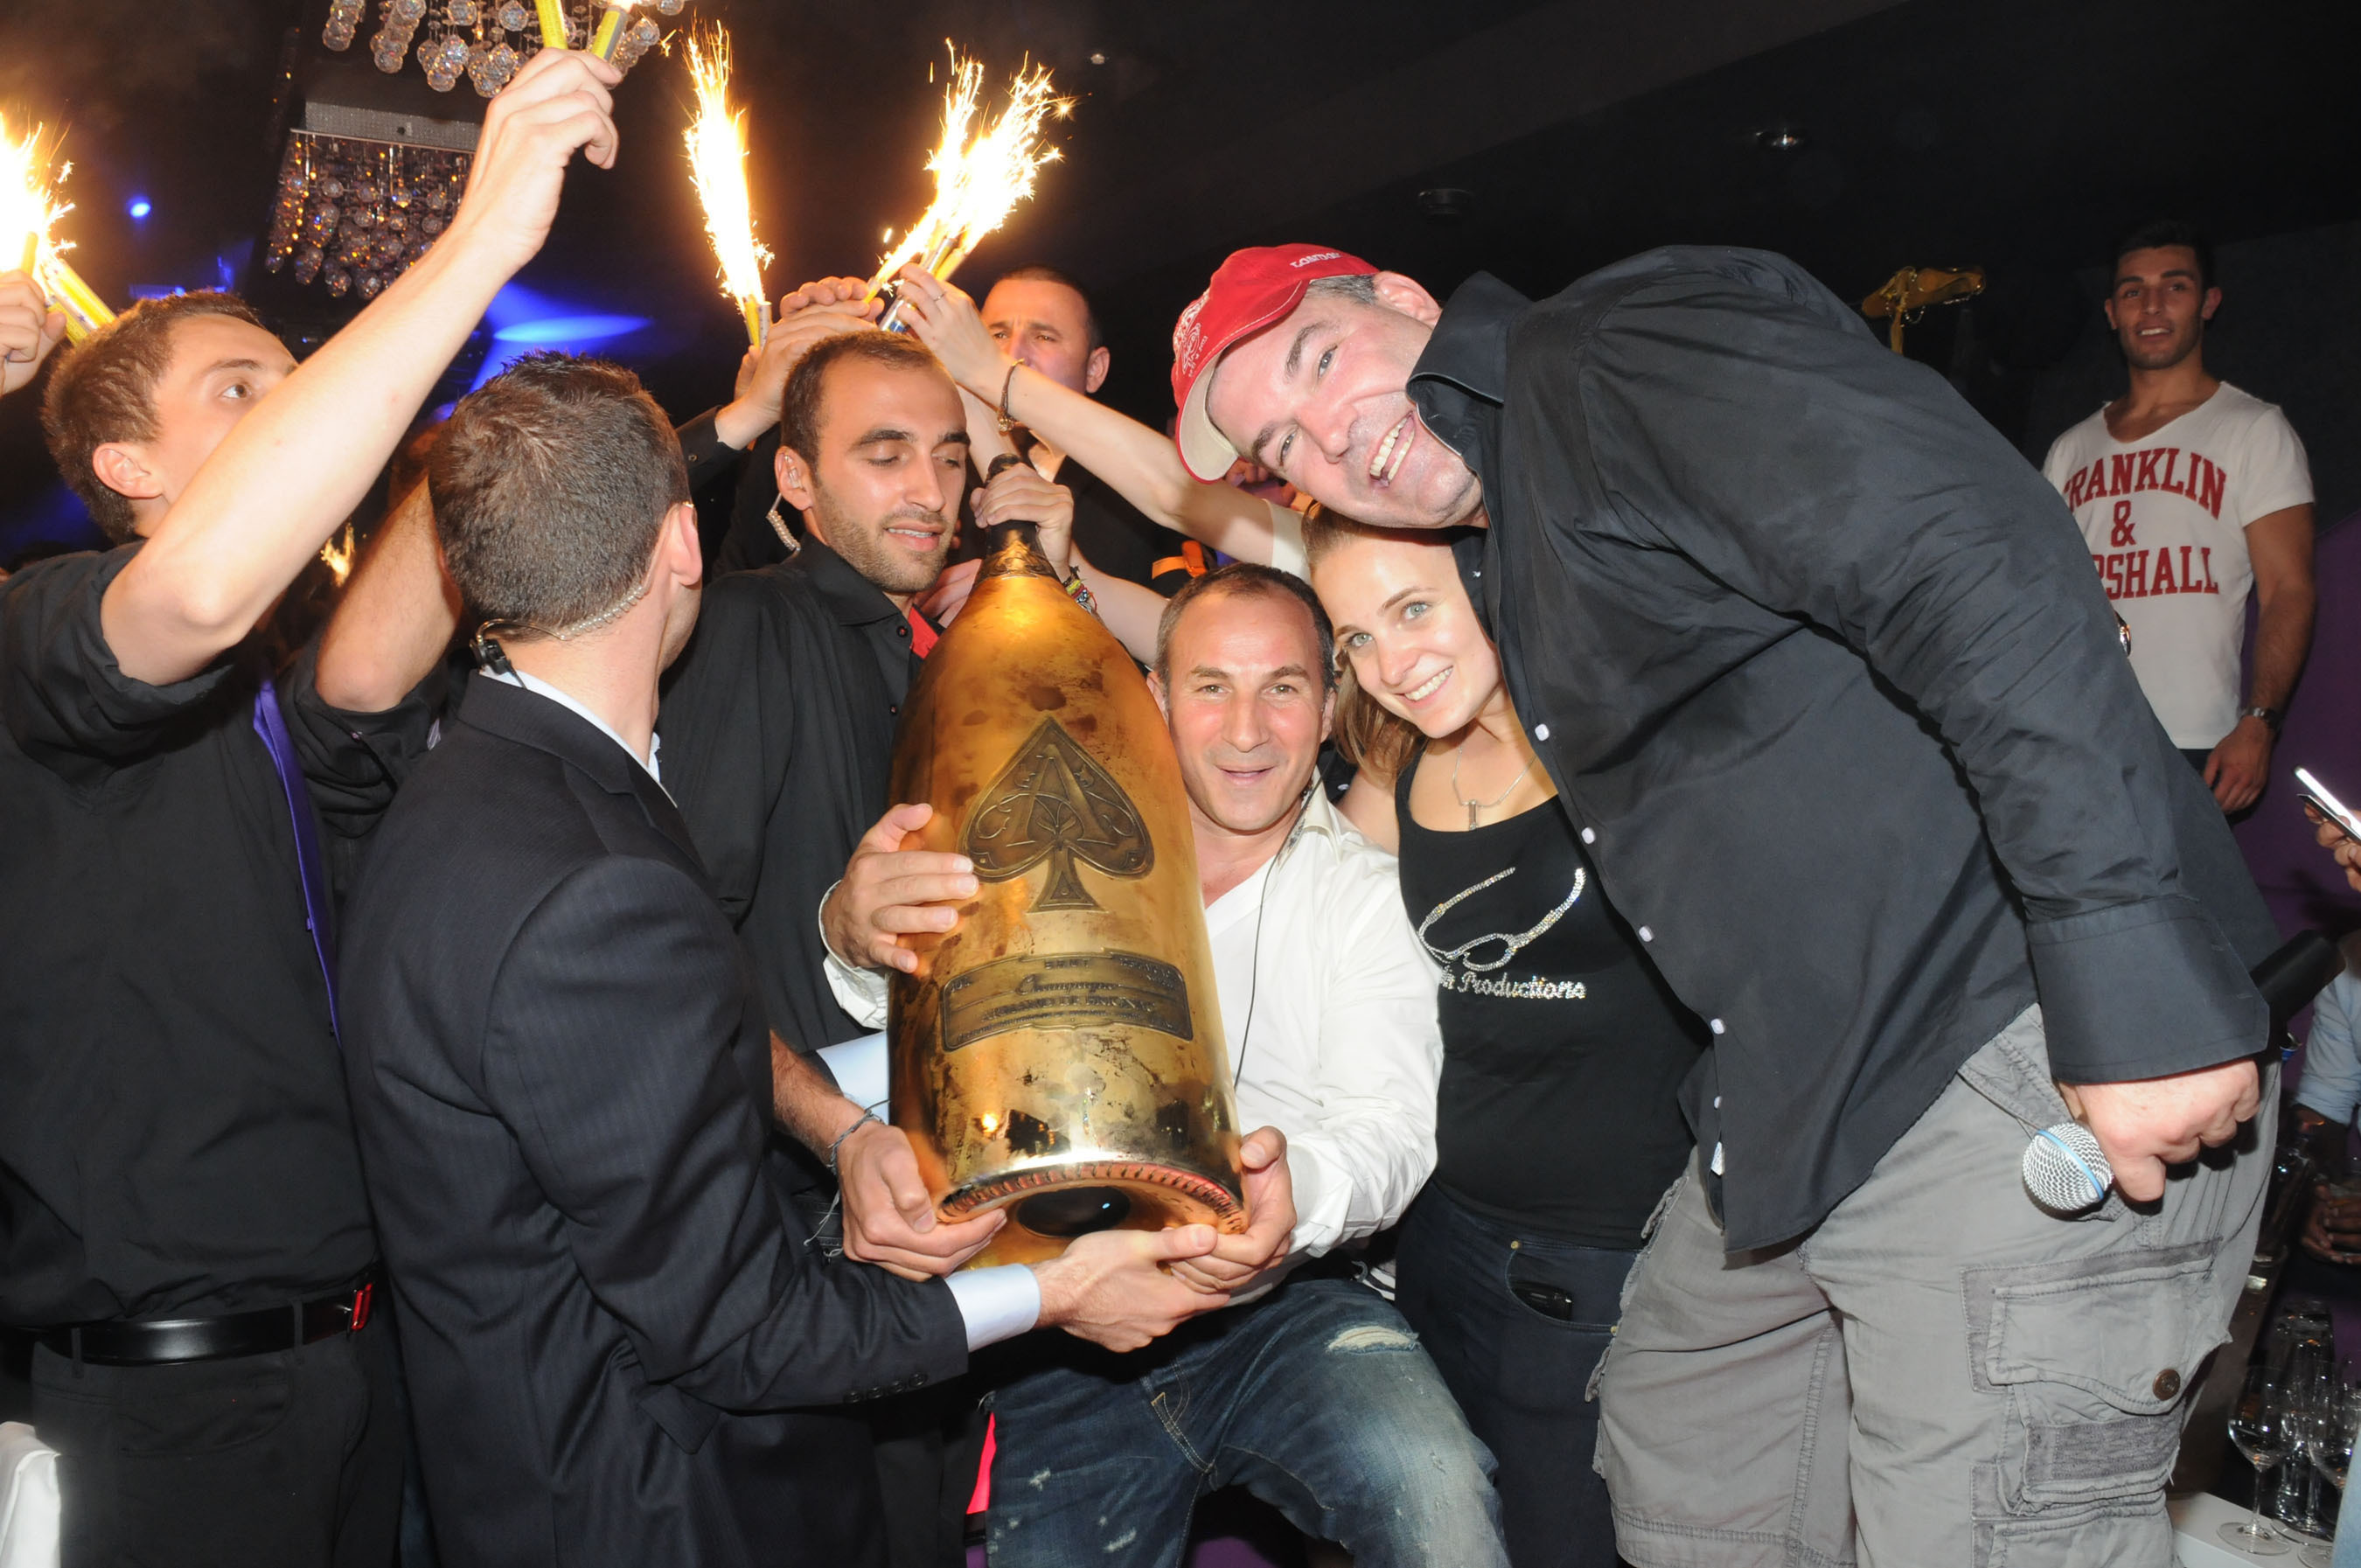 Magnum bottle of Ace of Spades Gold champagne - Picture of Dalla